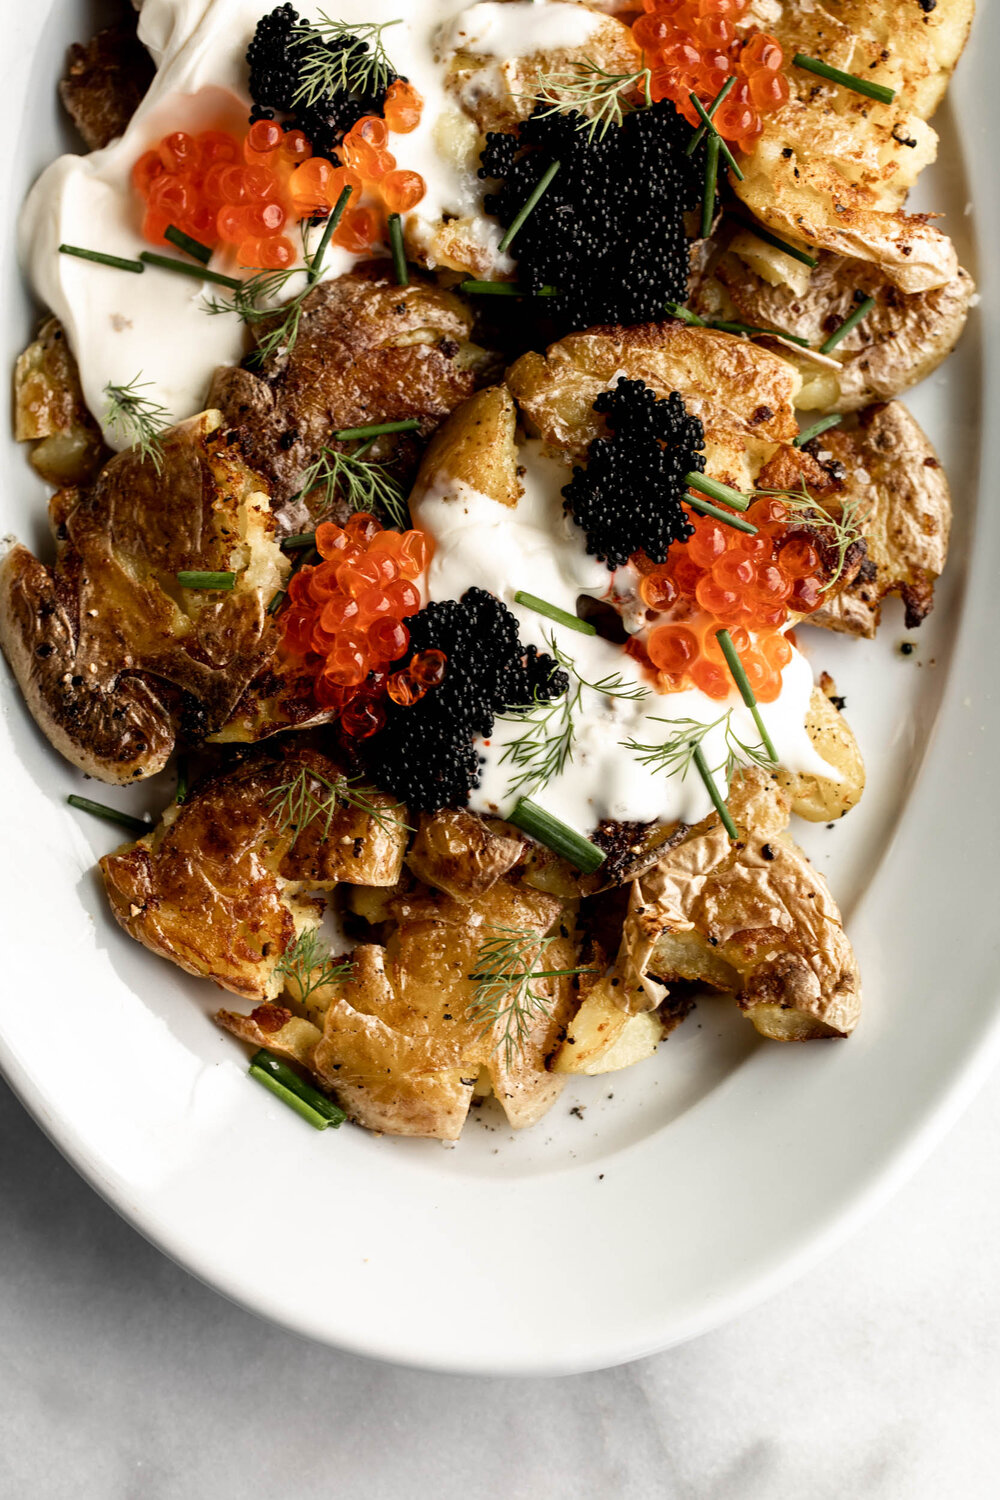 Crispy smashed fried potatoes are topped with creme fraiche, chives and caviar for a luxurious and indulgent holiday side.